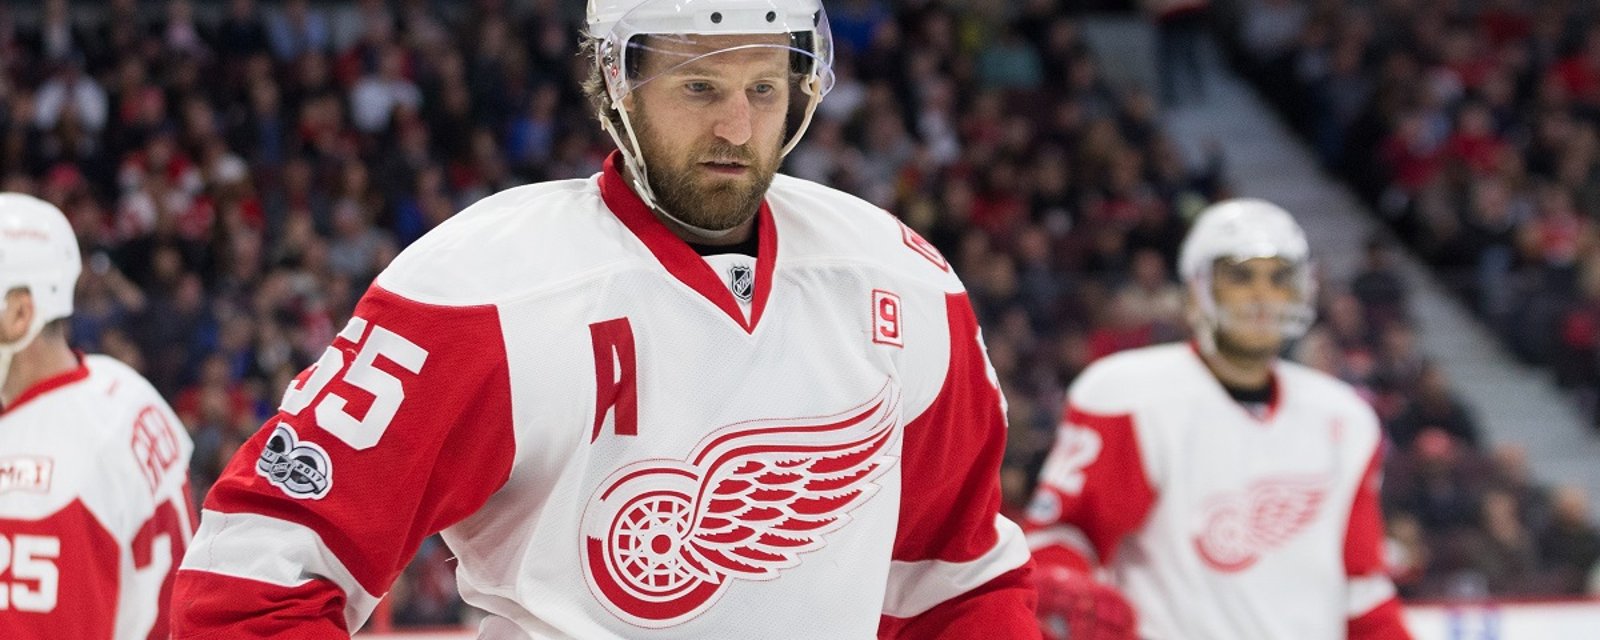 Steve Yzerman comments on the future of Nicklas Kronwall.